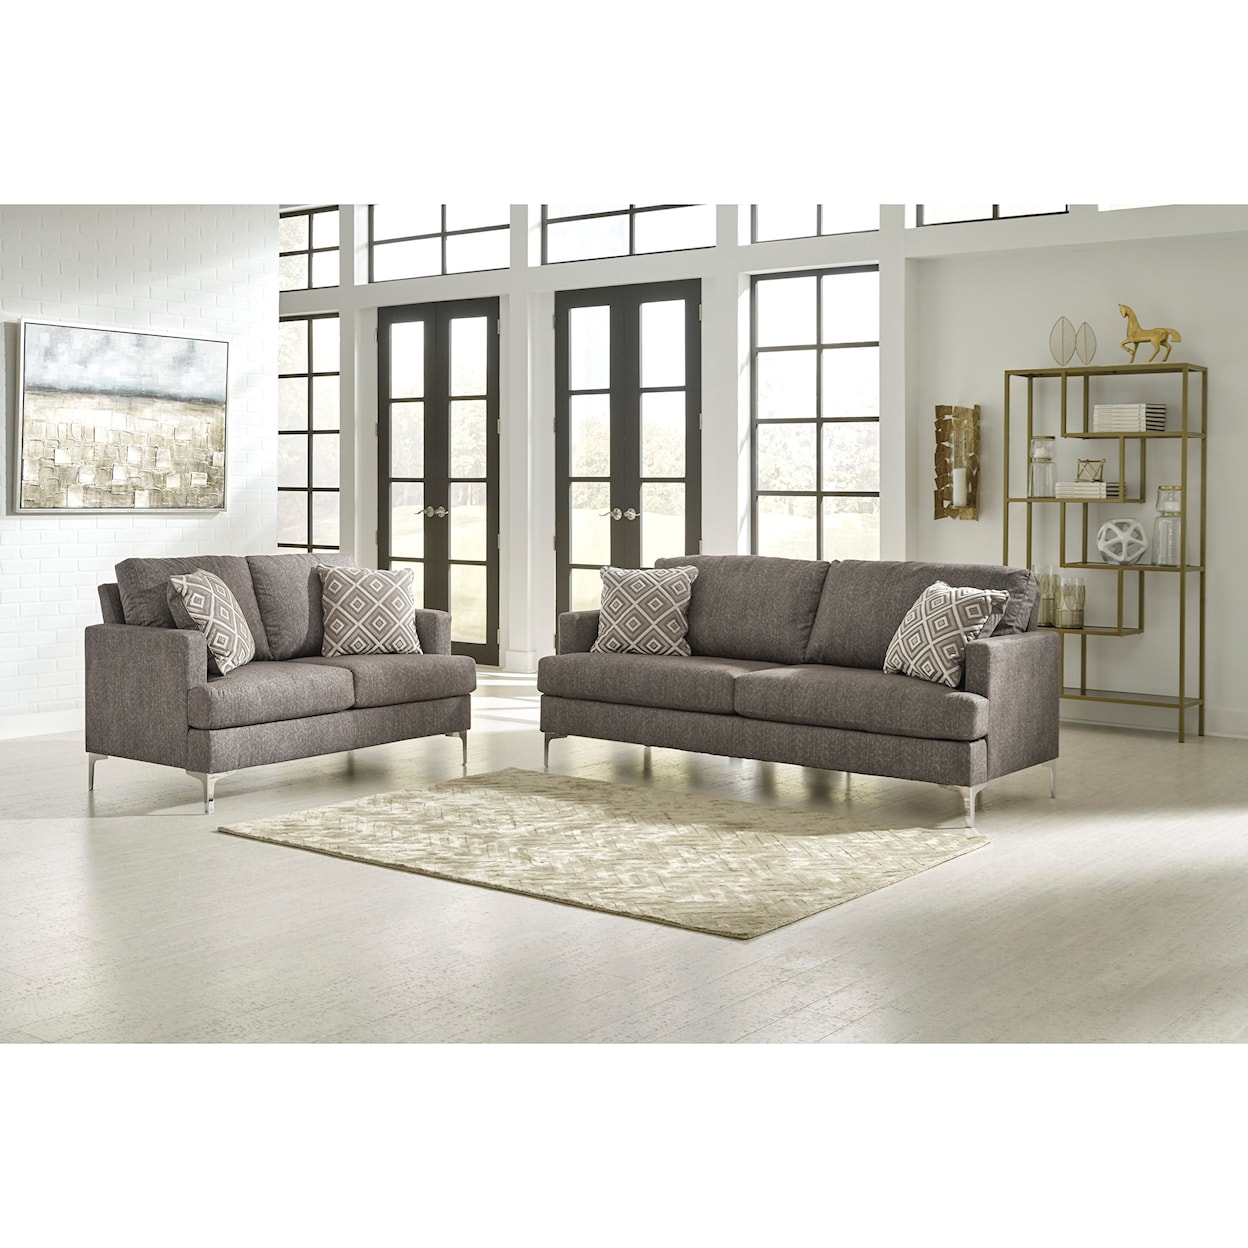 Signature Design by Ashley Arcola Sofa and Loveseat